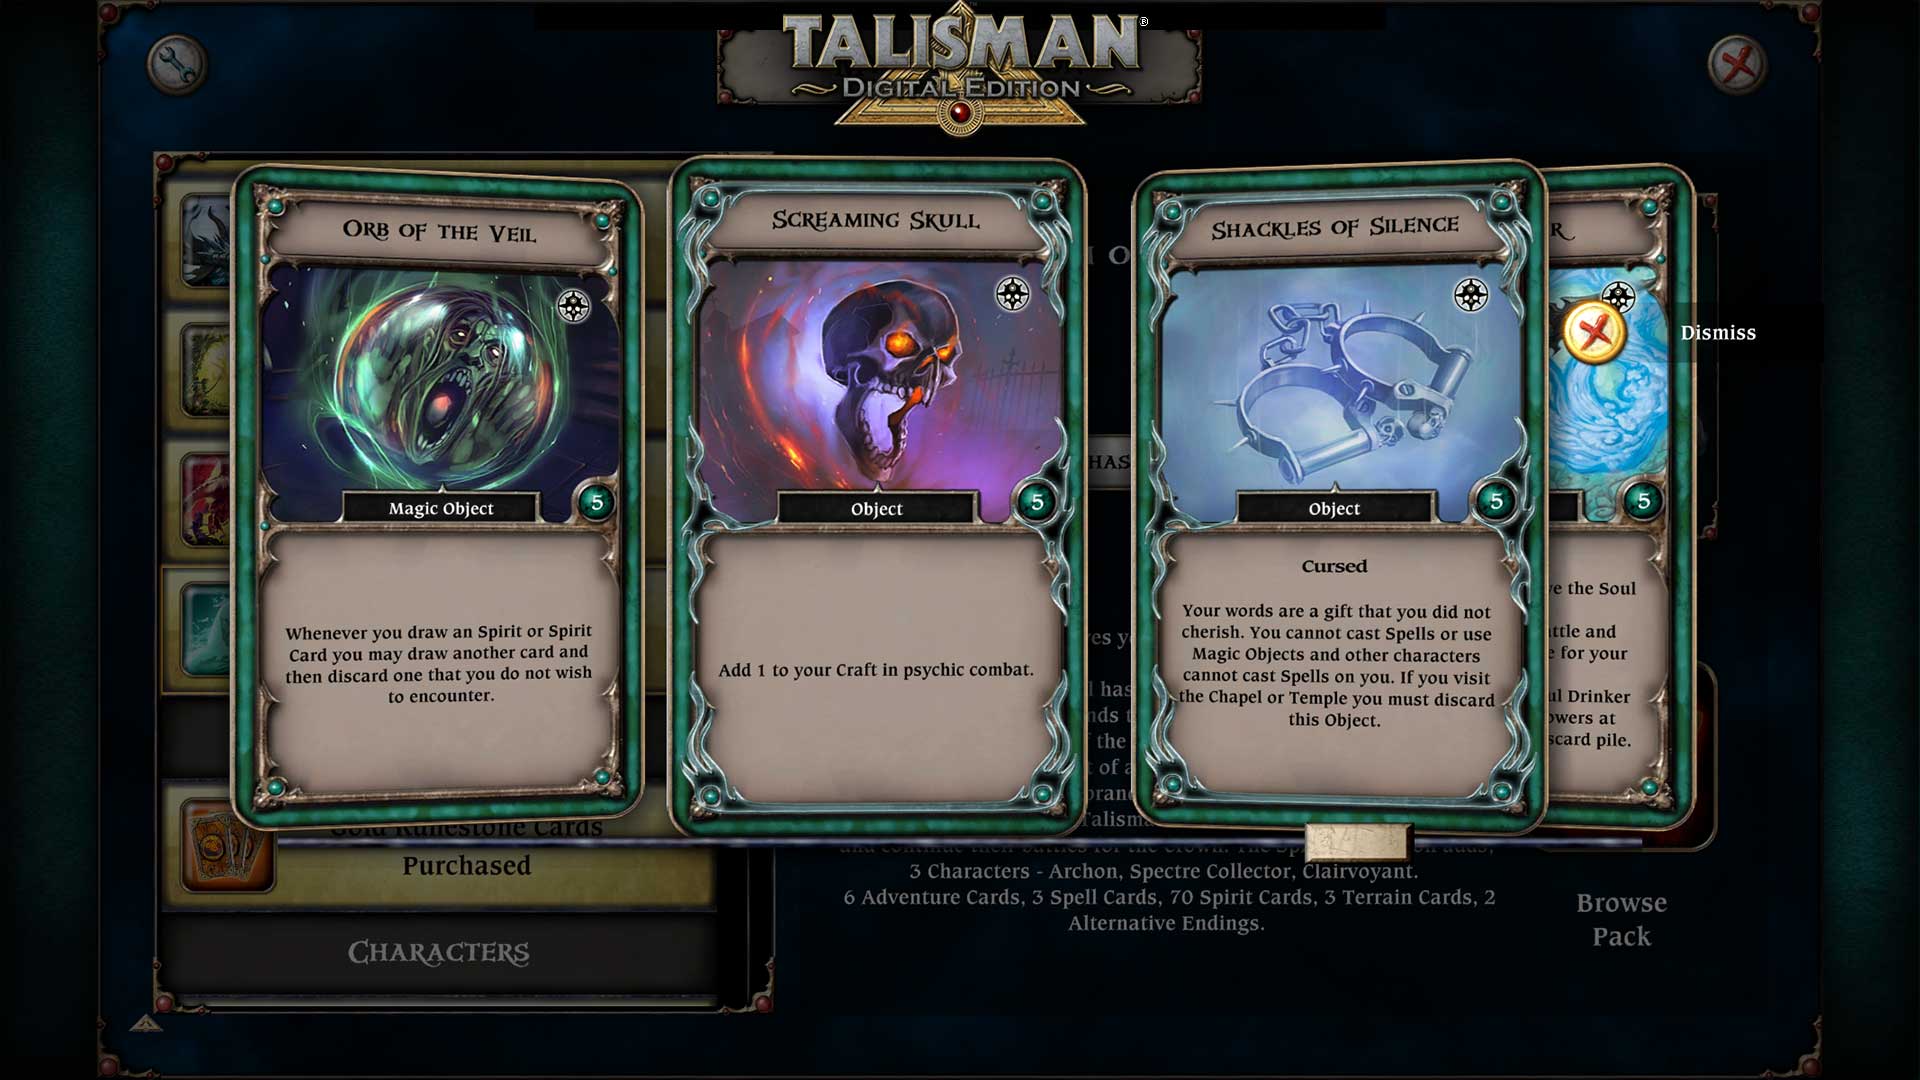 Talisman - The Realm of Souls Expansion DLC Steam CD Key, $2.16